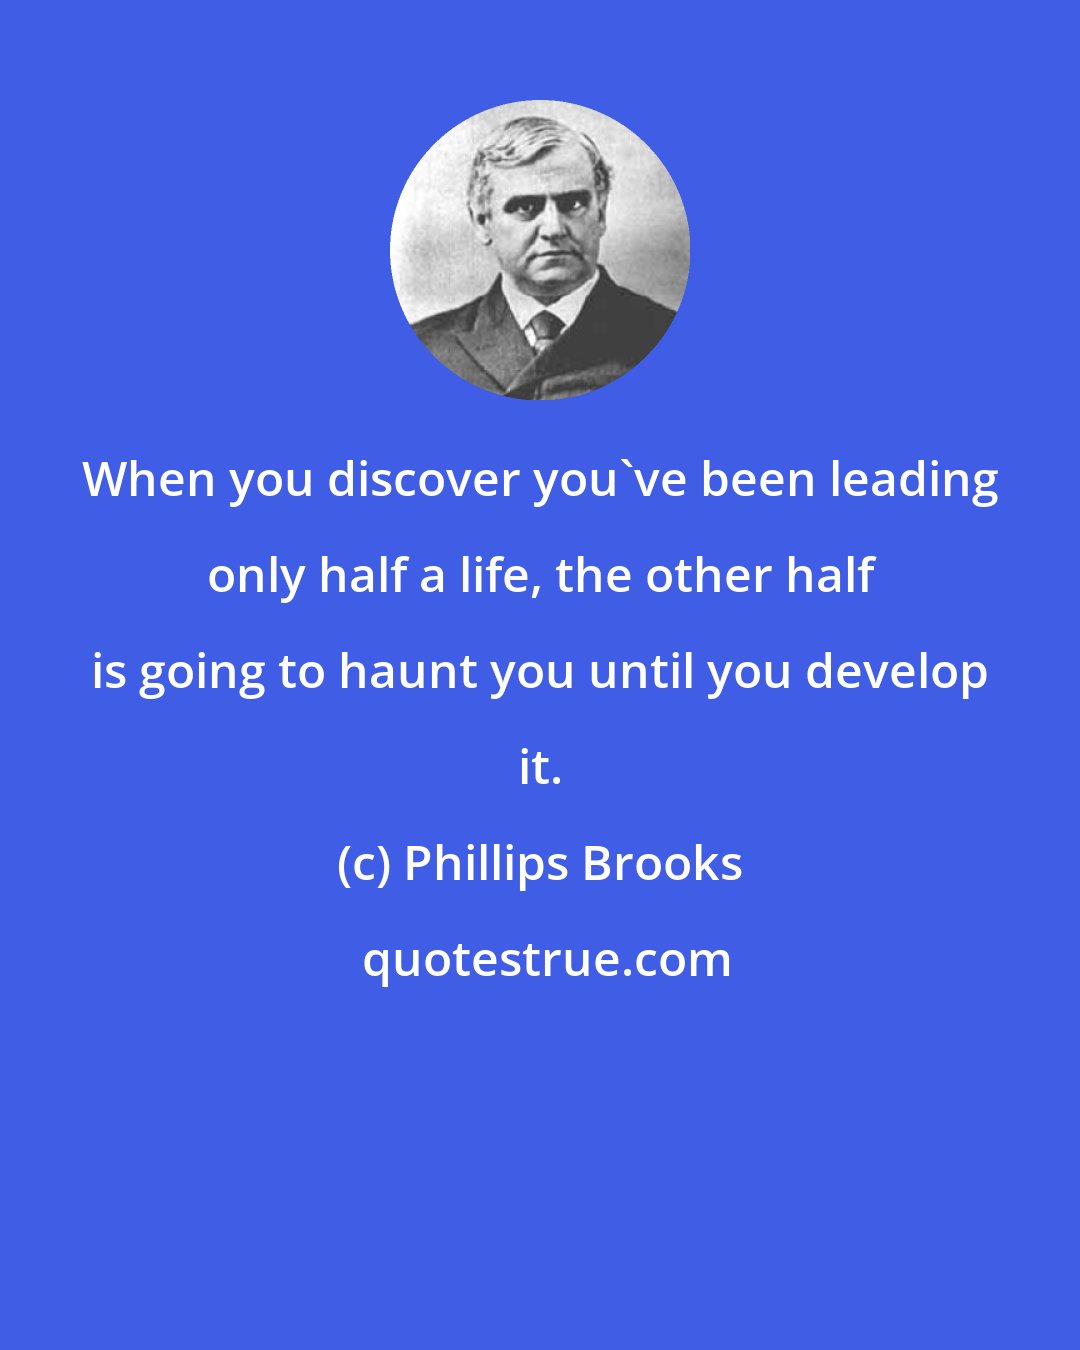 Phillips Brooks: When you discover you've been leading only half a life, the other half is going to haunt you until you develop it.